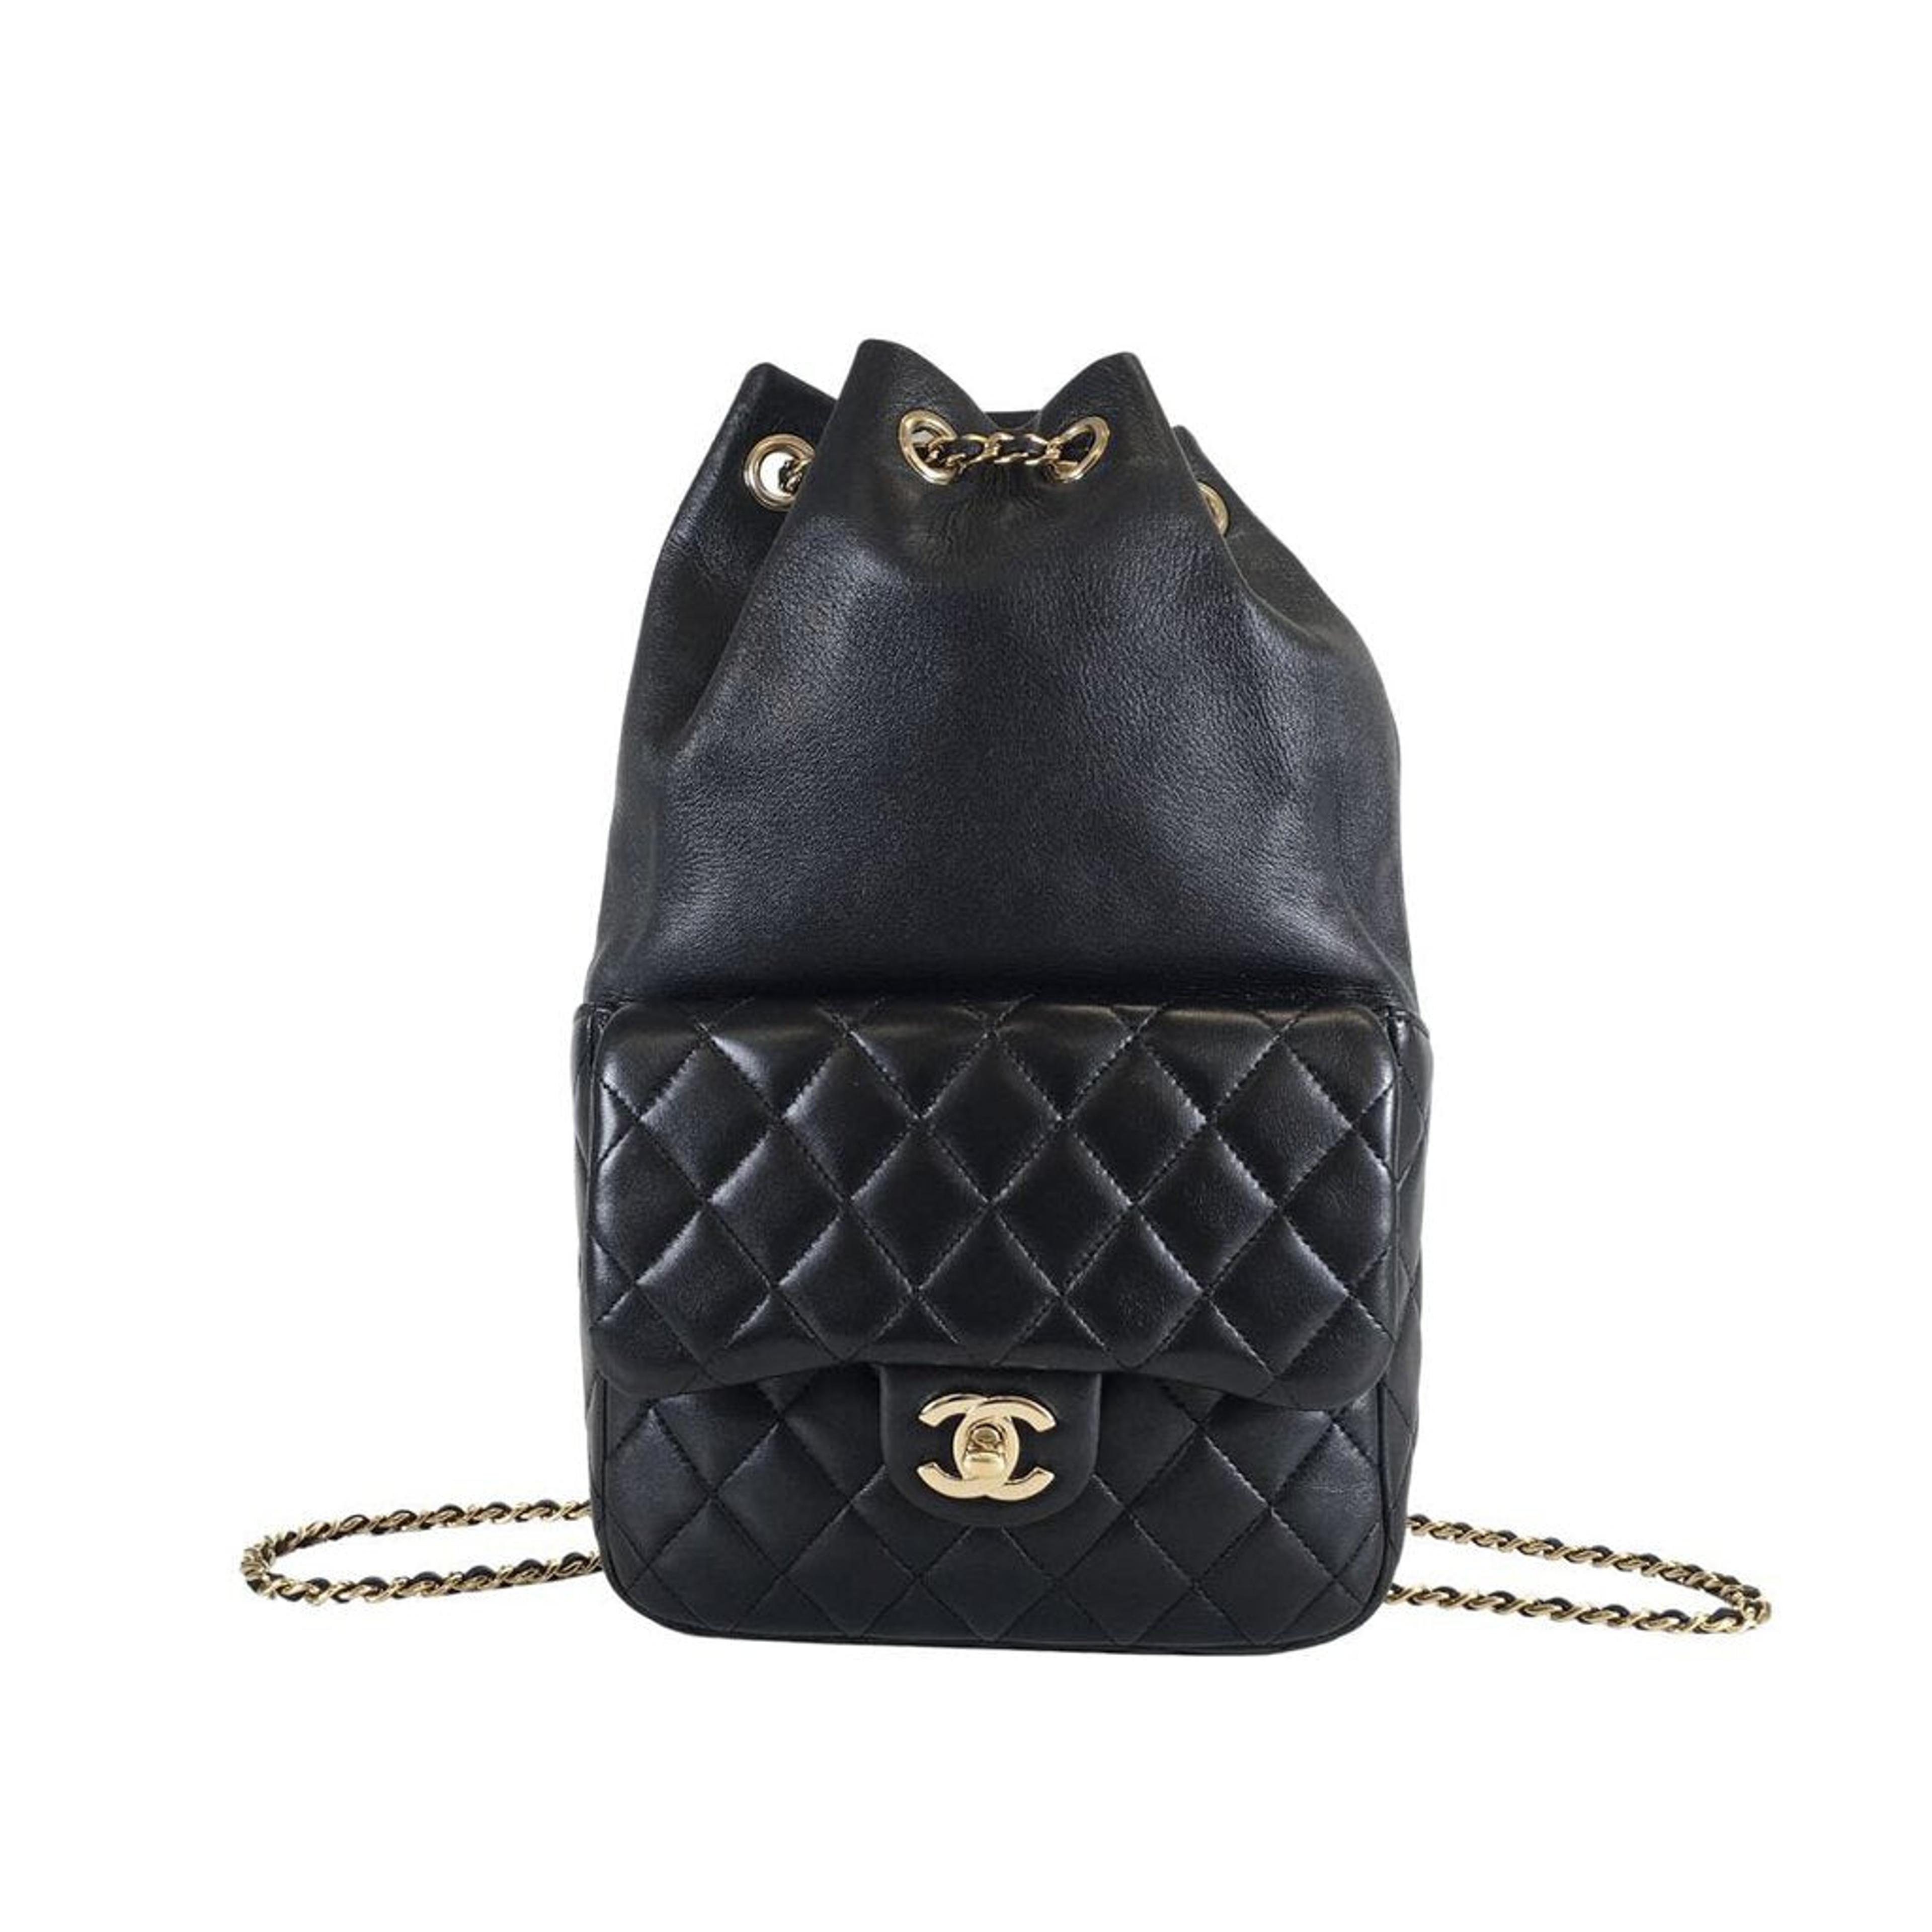 Chanel Metallic Gold Quilted Leather Small Seoul Backpack Chanel